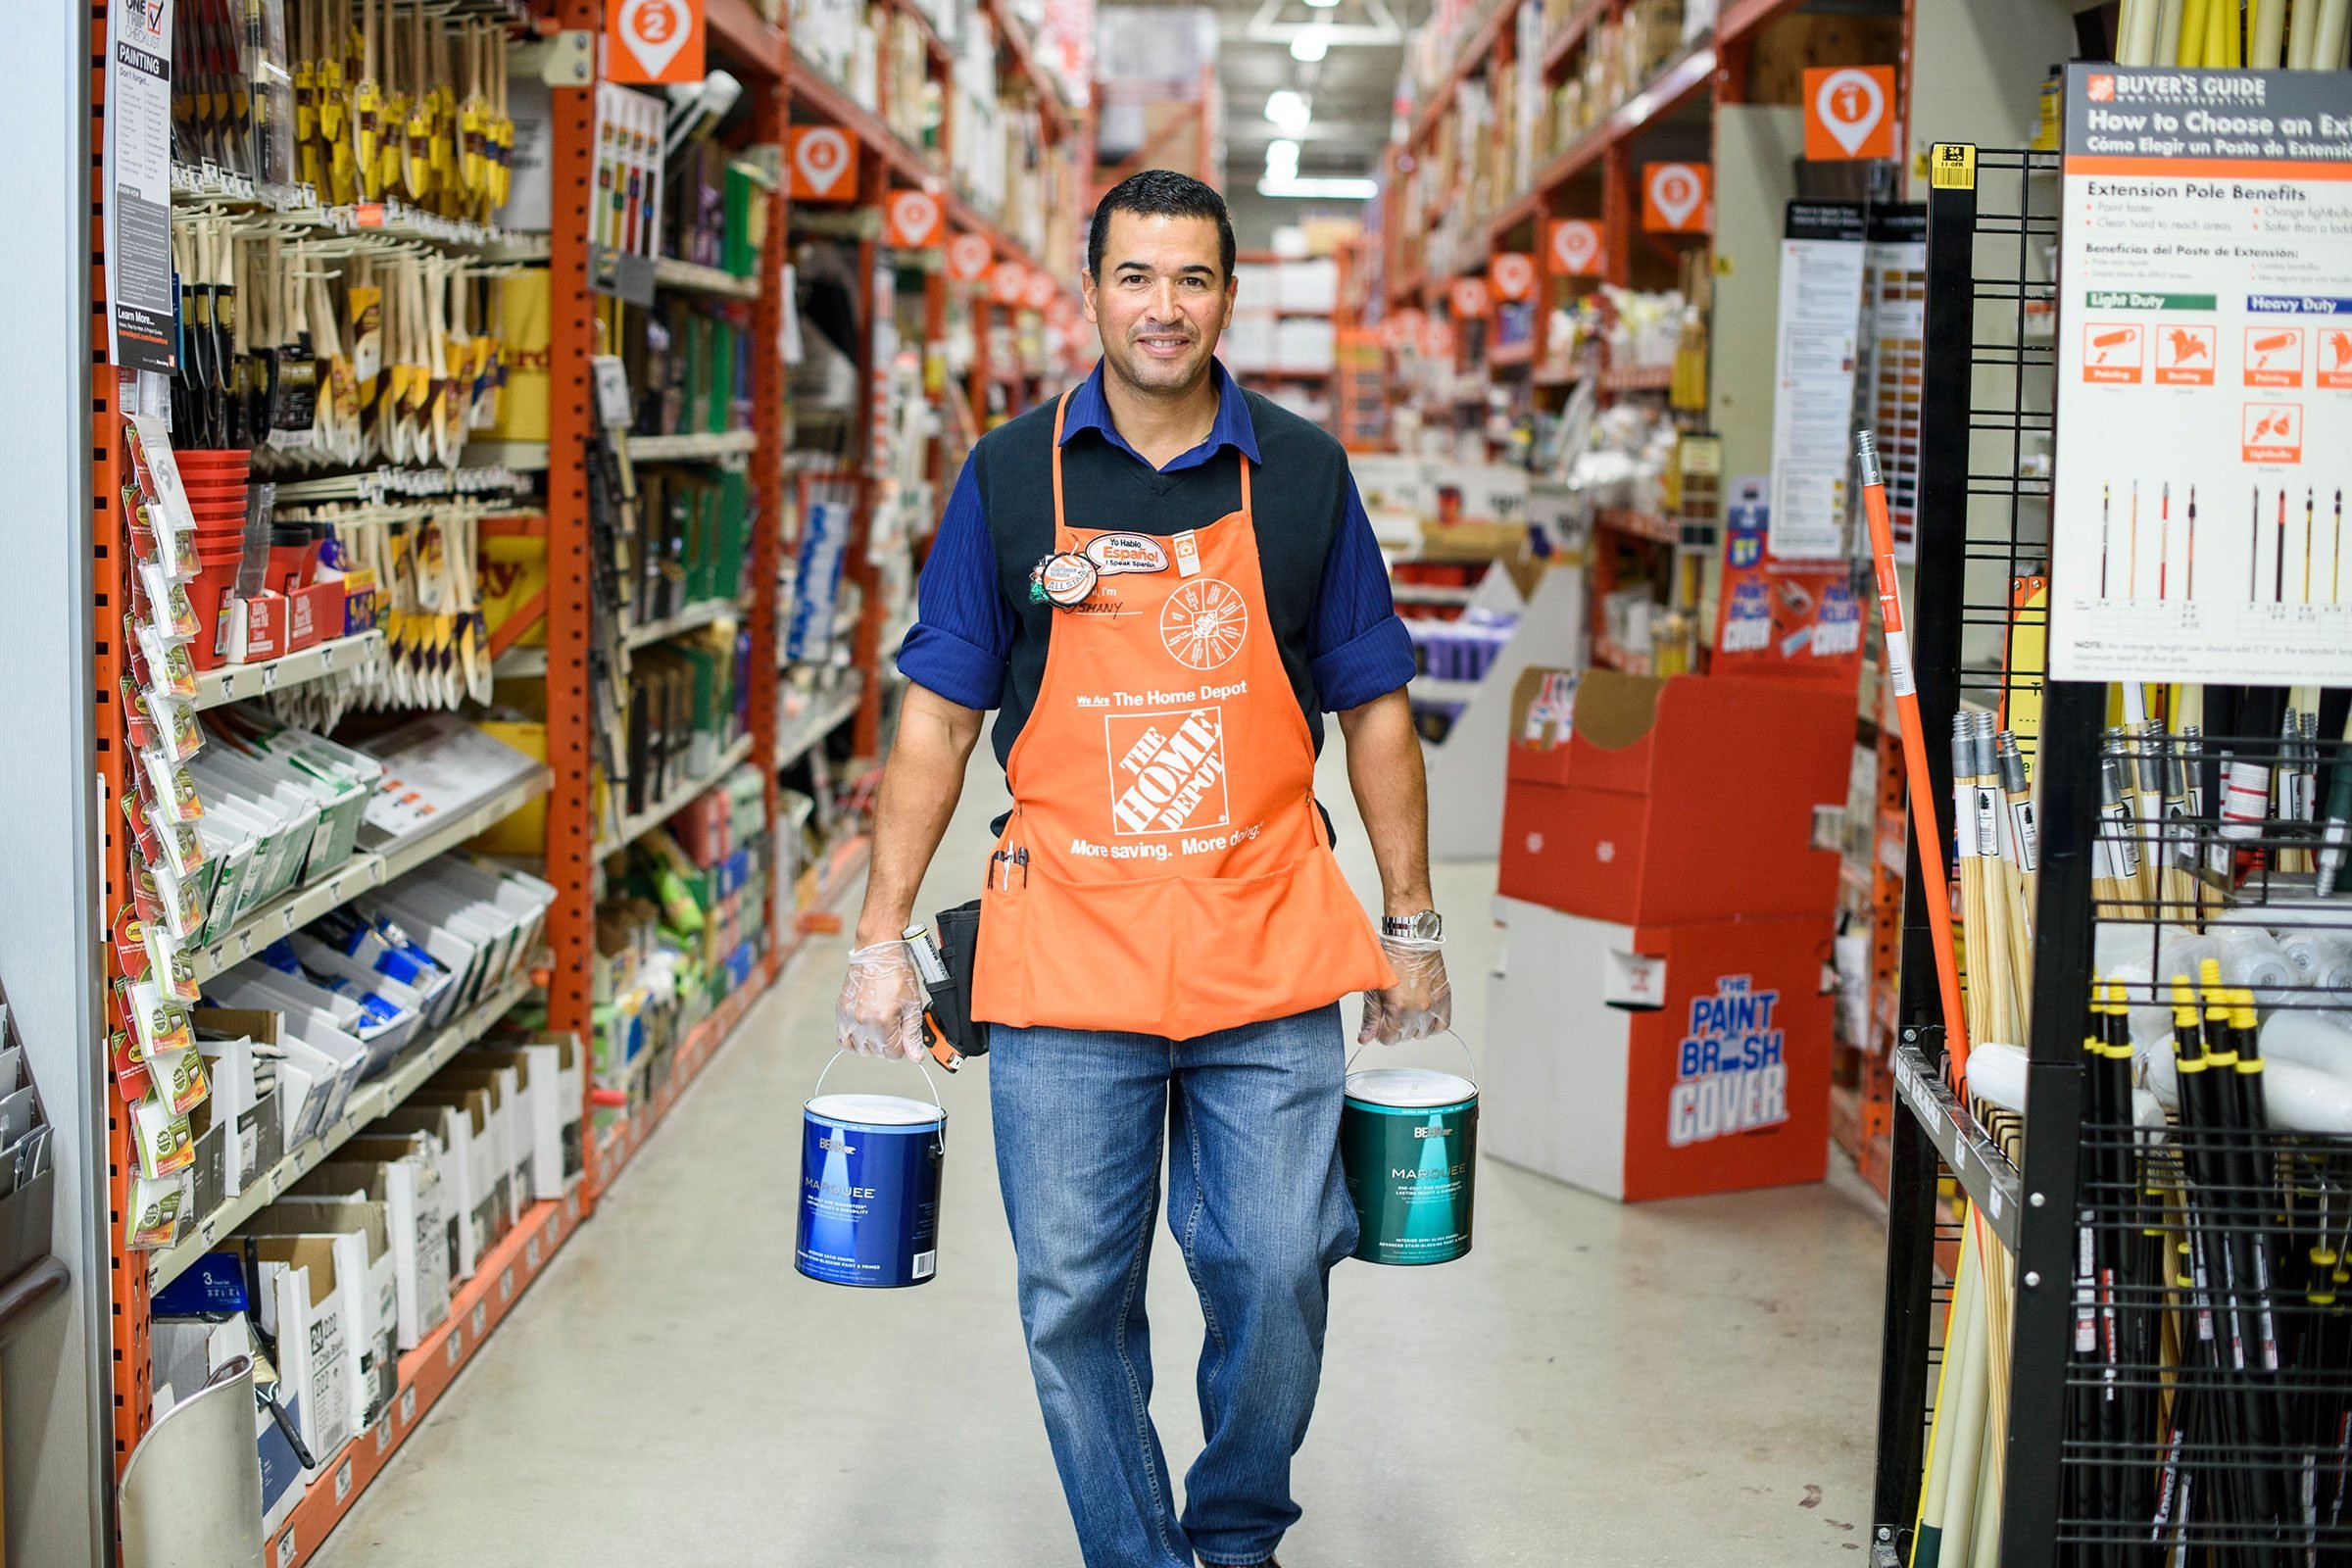 The Home Depot Just Increased Its Minimum Wage to $15 Per Hour